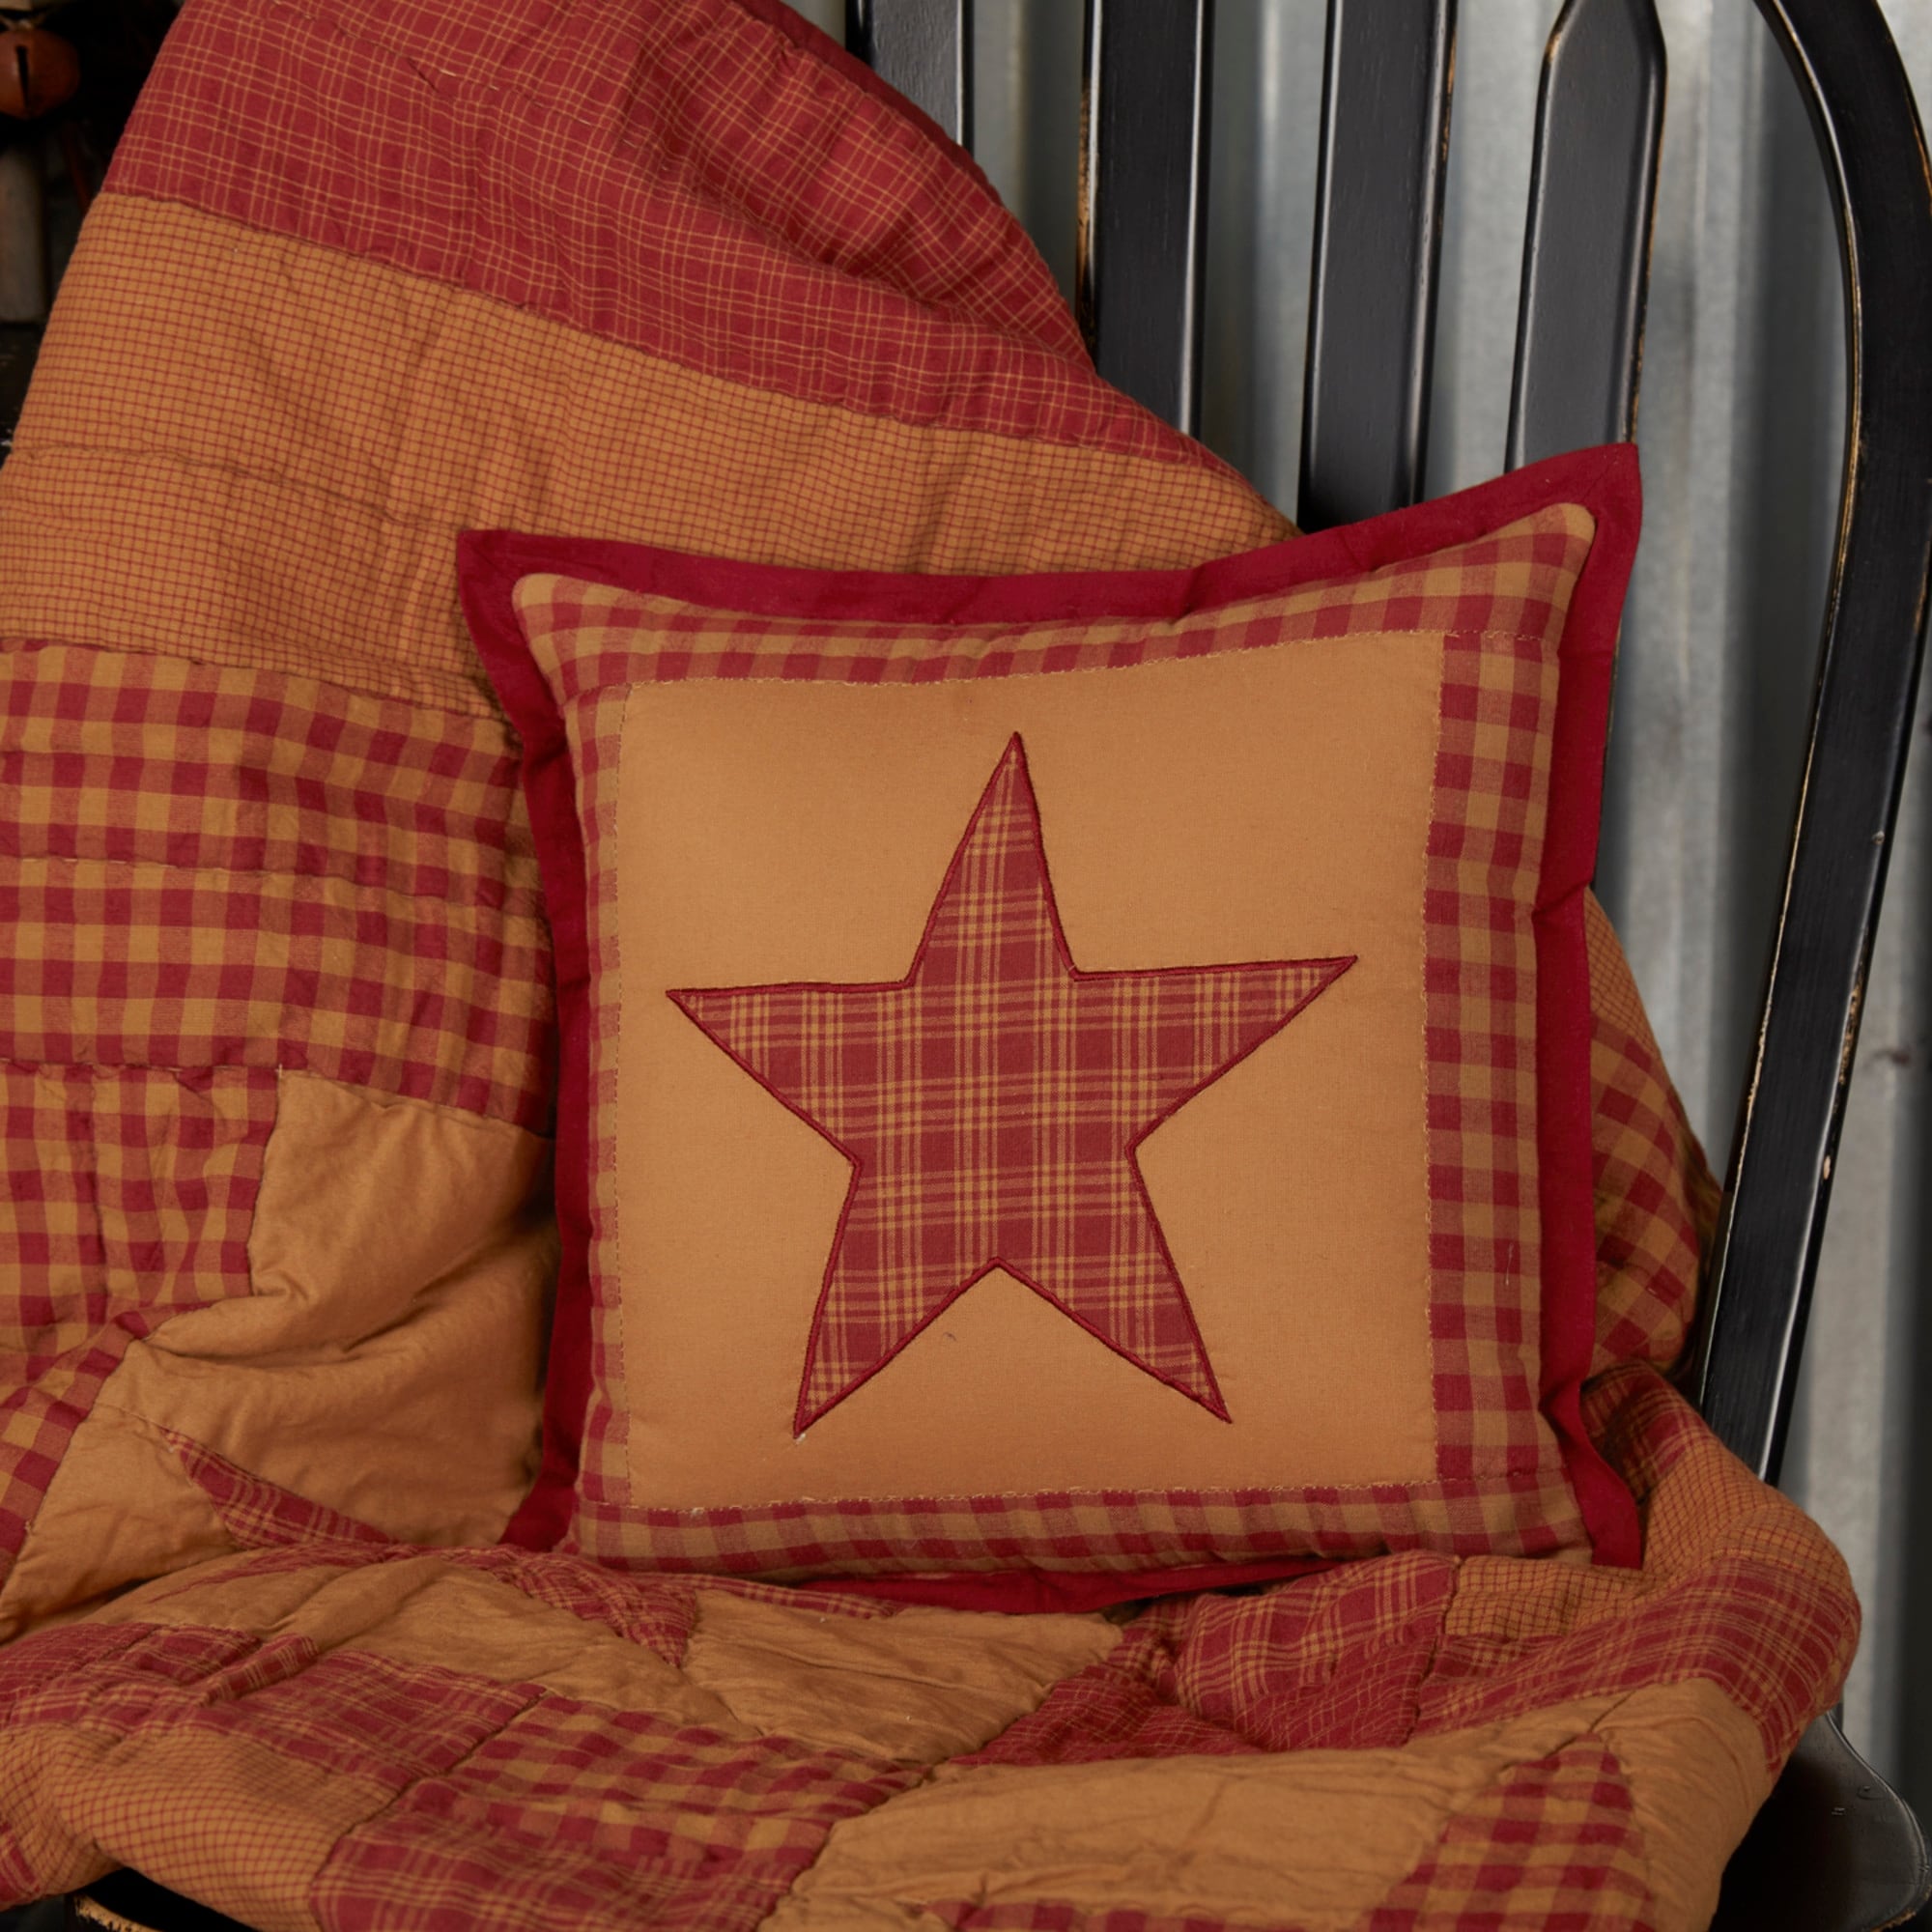 https://ak1.ostkcdn.com/images/products/is/images/direct/3abaea23157f36e63c67a1cc20c02126c3f23177/Ninepatch-Star-Quilted-Pillow-12x12.jpg